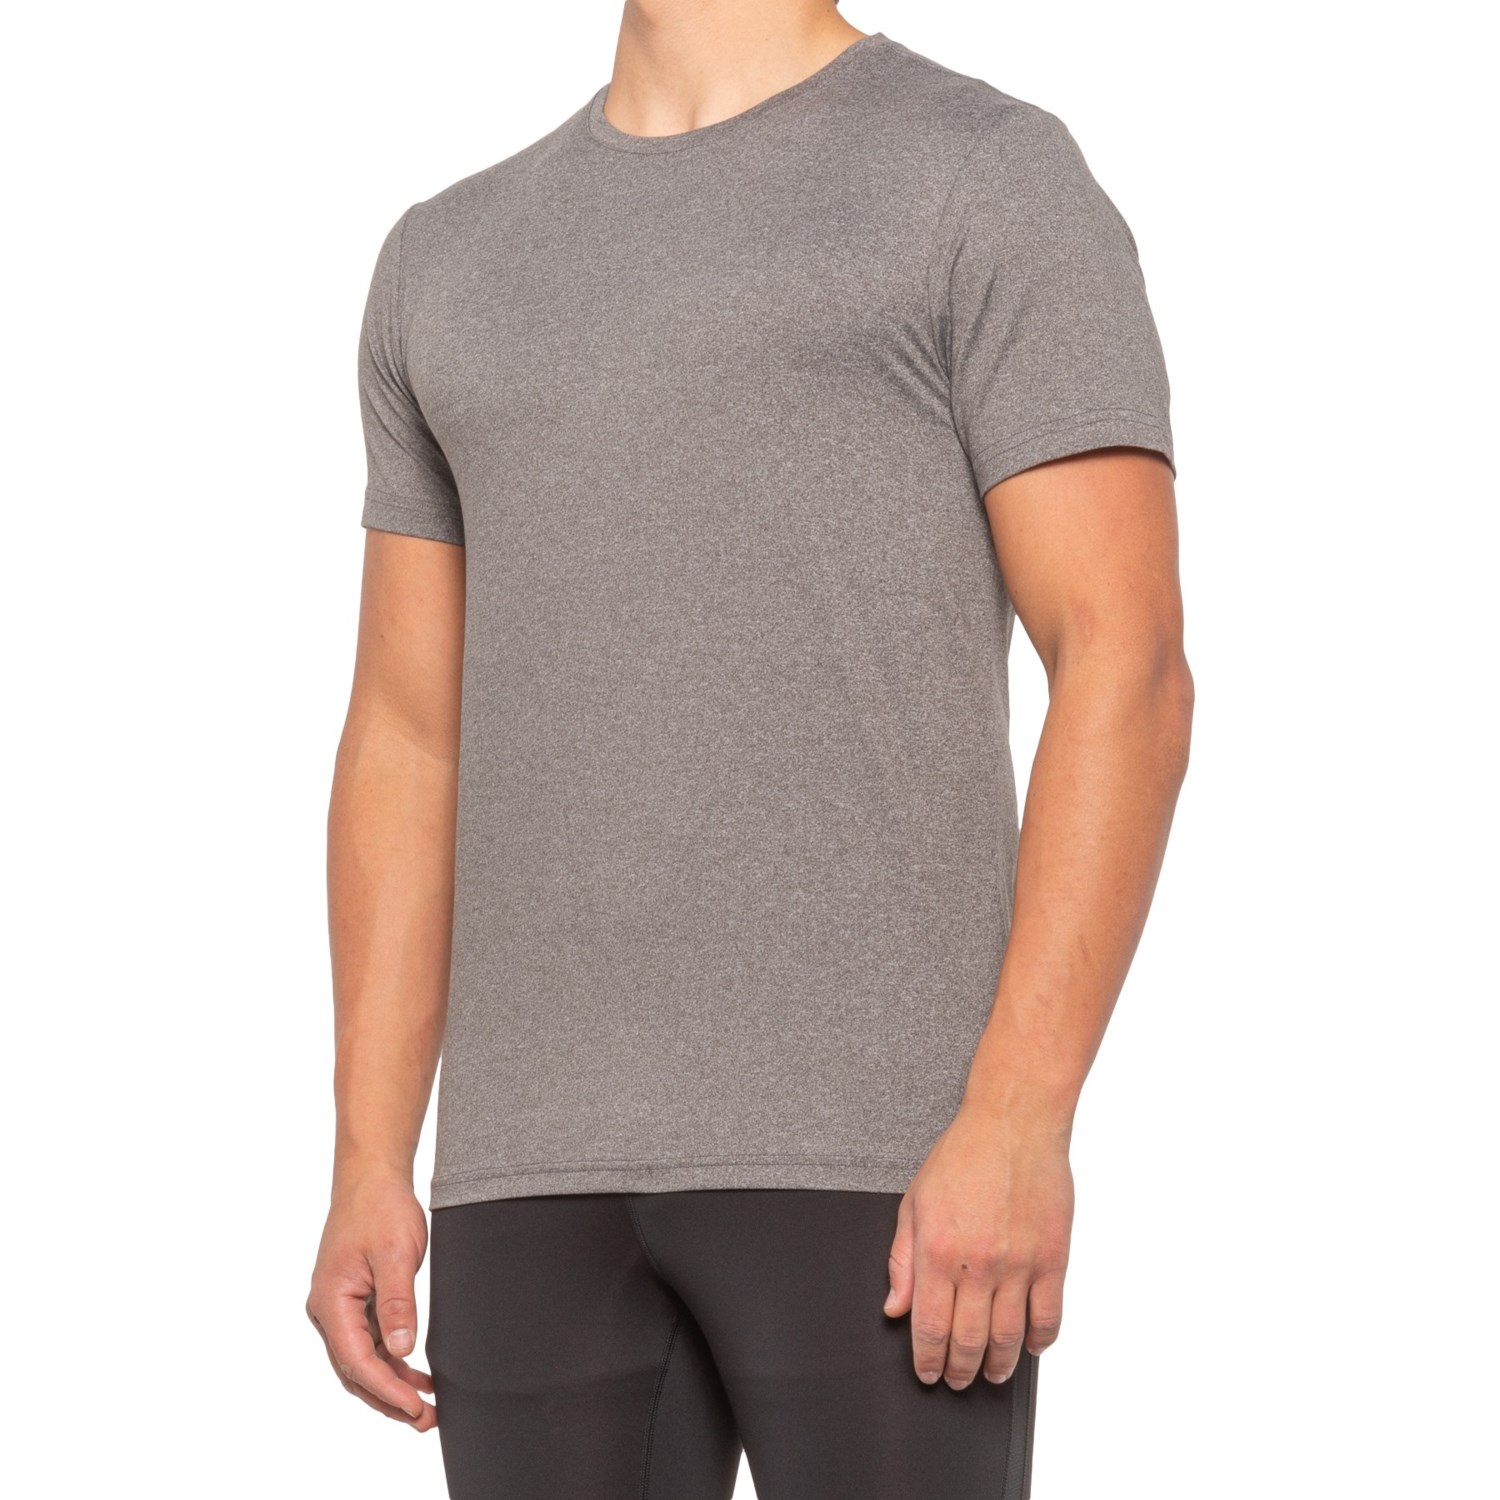 32 Degrees Cool Supersoft Knit T-Shirt (For Men) - Save 33%